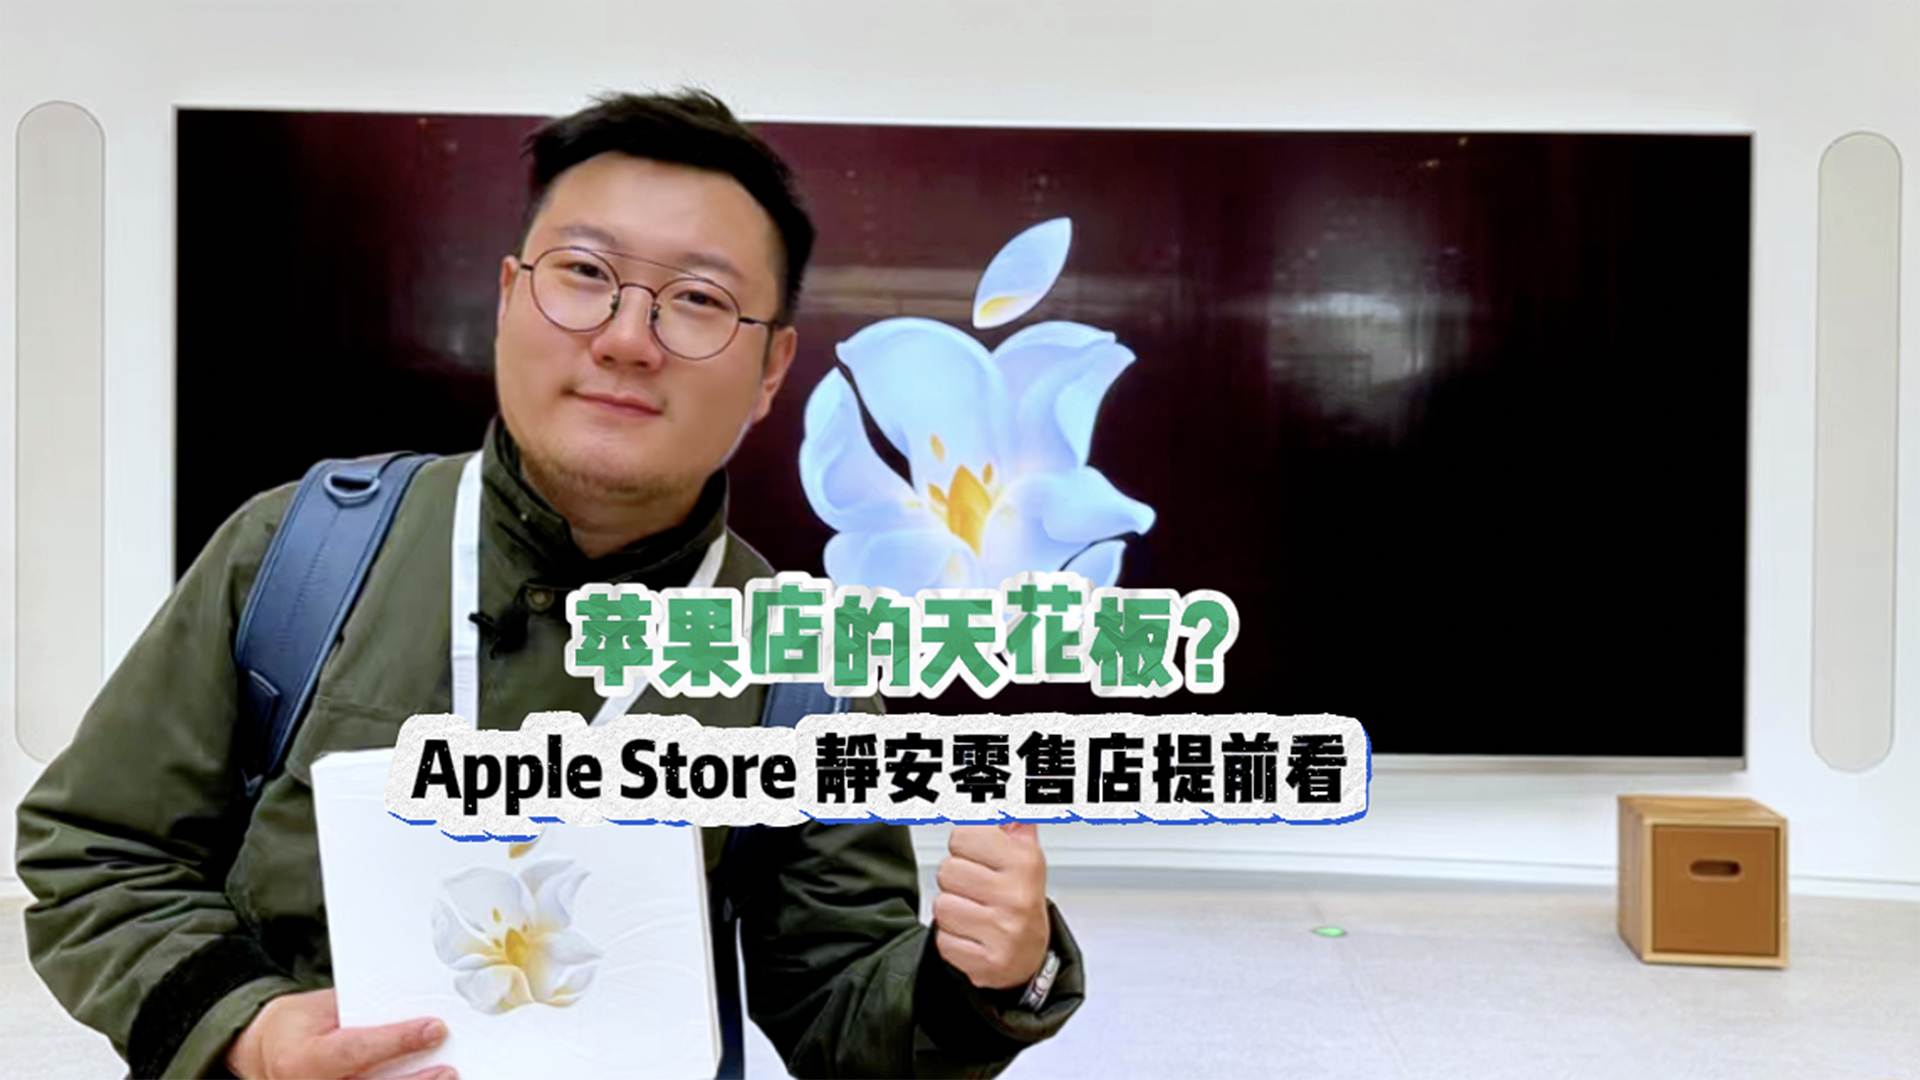  Look ahead at Apple Store Jing'an retail store